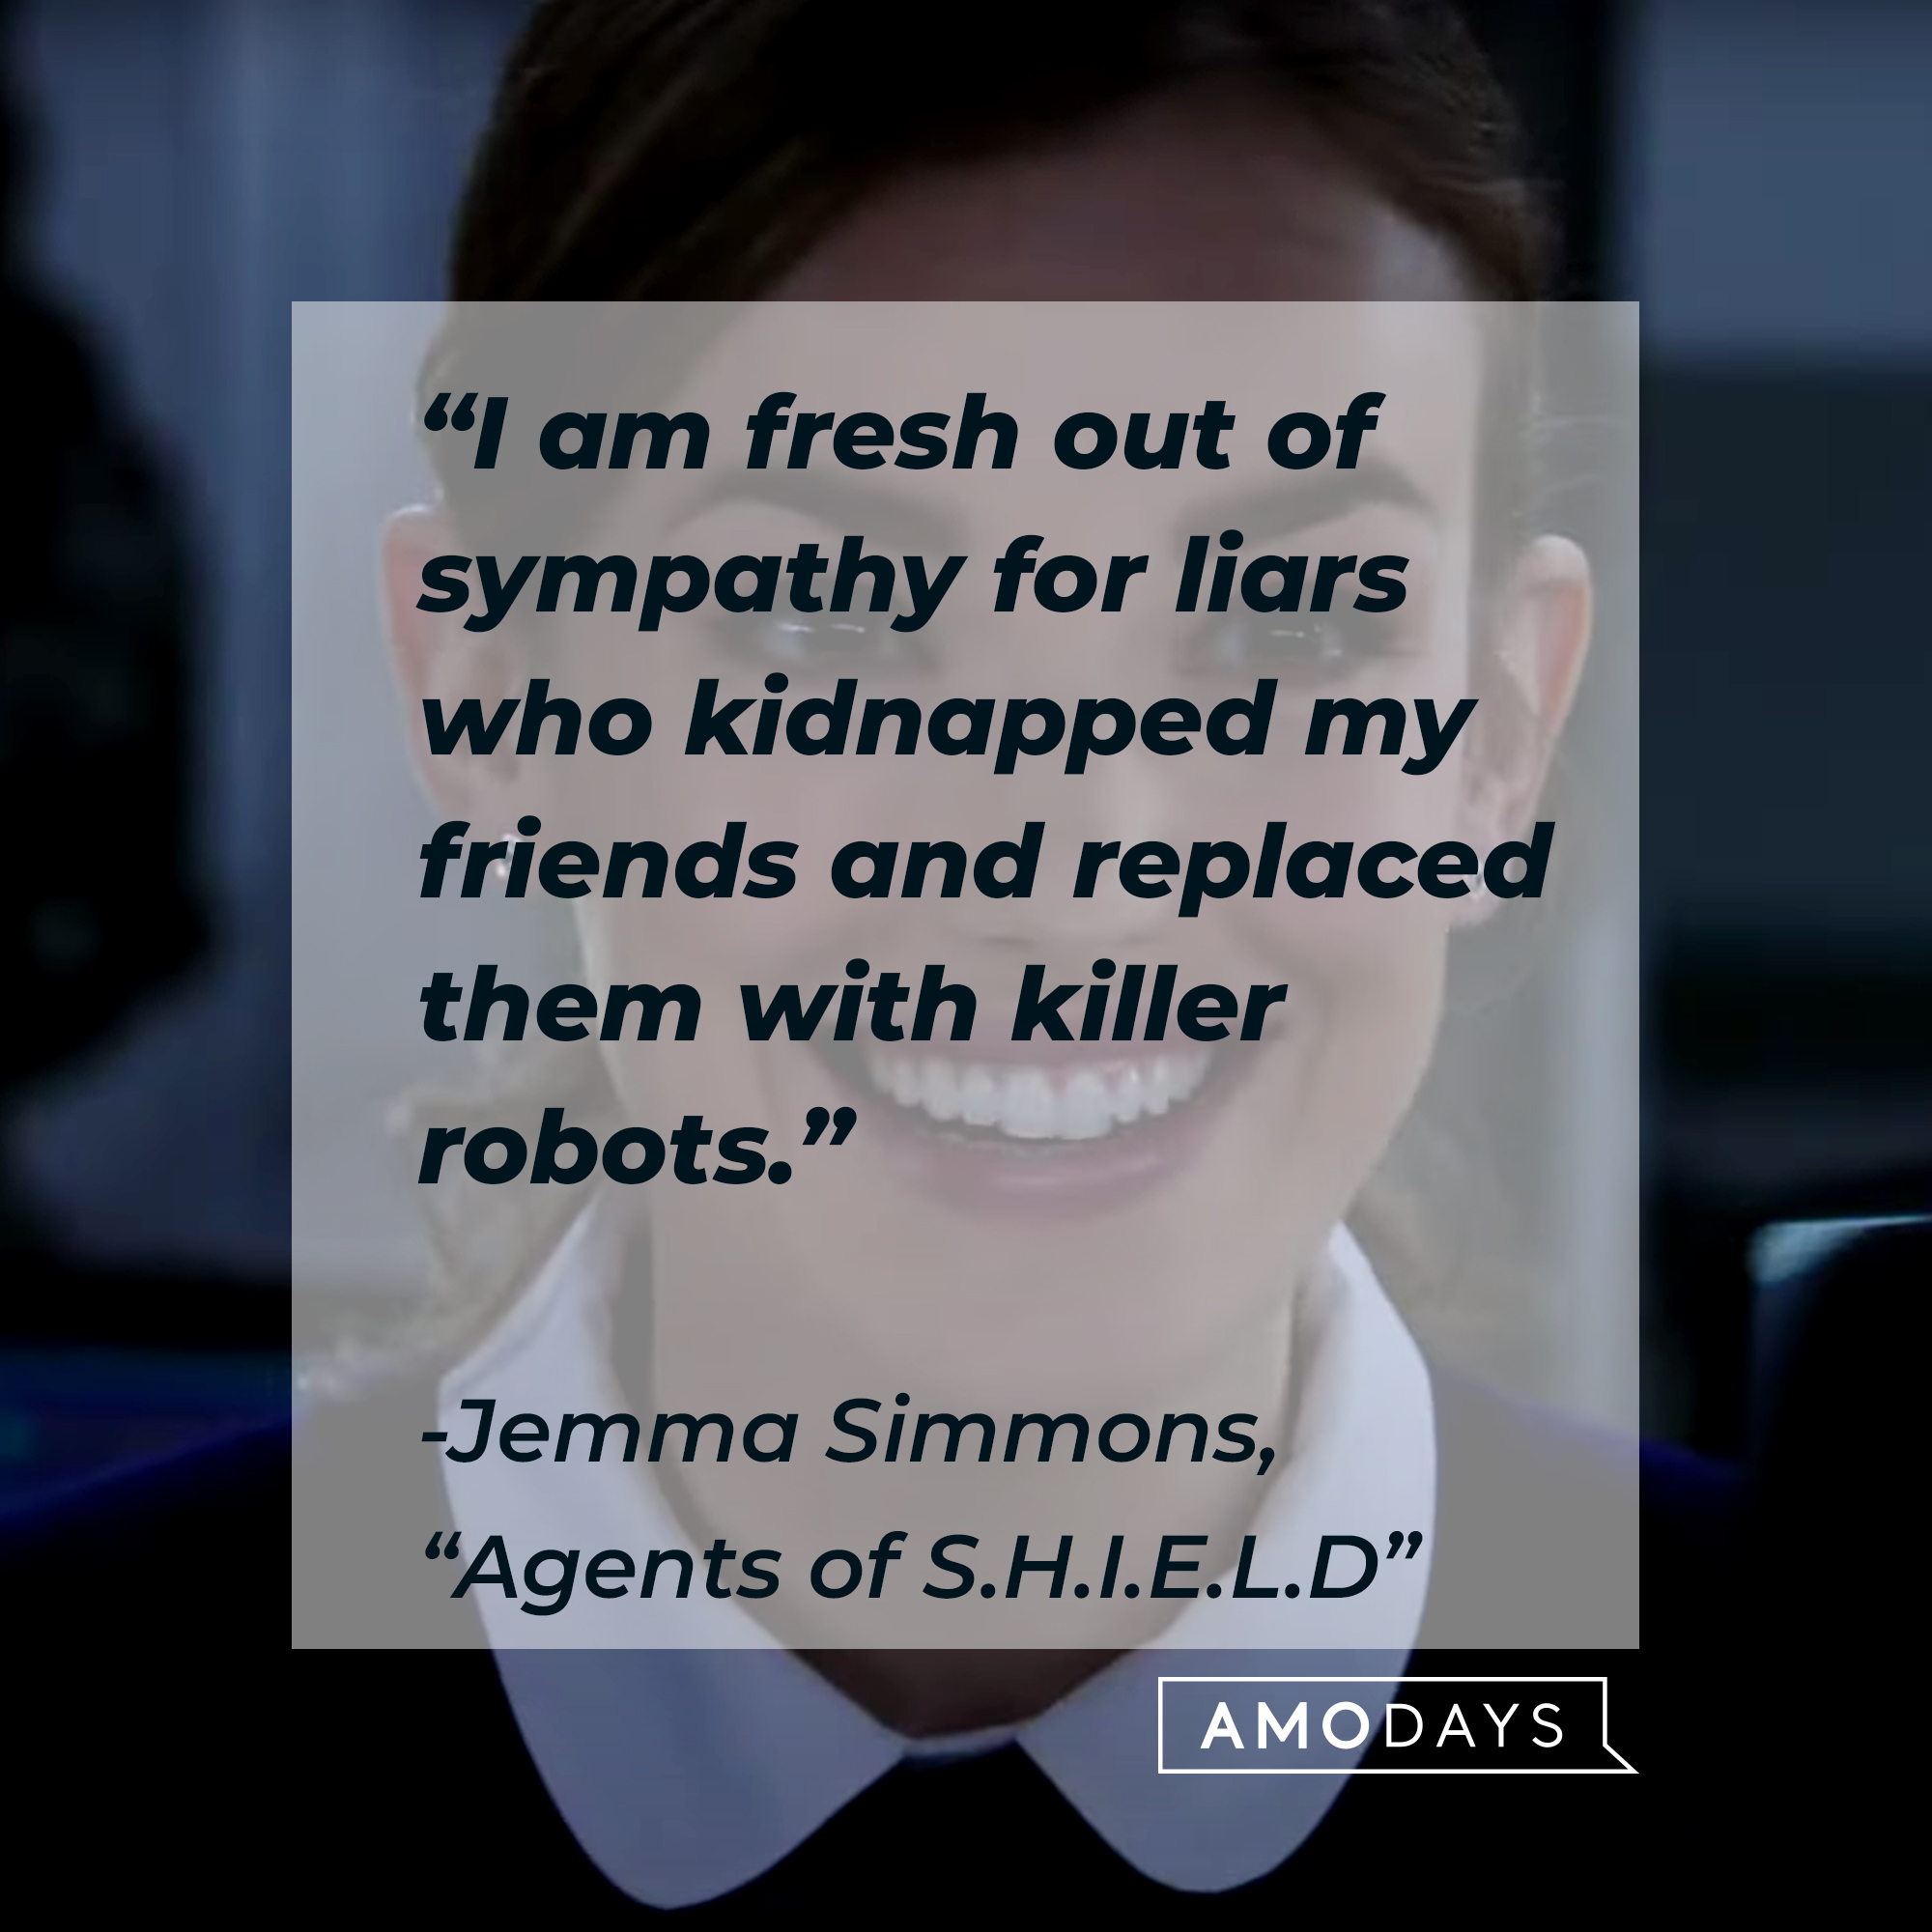 Jemma Simmons with her quote from "Agents of S.H.I.E.L.D.:" “I am fresh out of sympathy for liars who kidnapped my friends and replaced them with killer robots.” | Source: Facebook.com/AgentsofShield